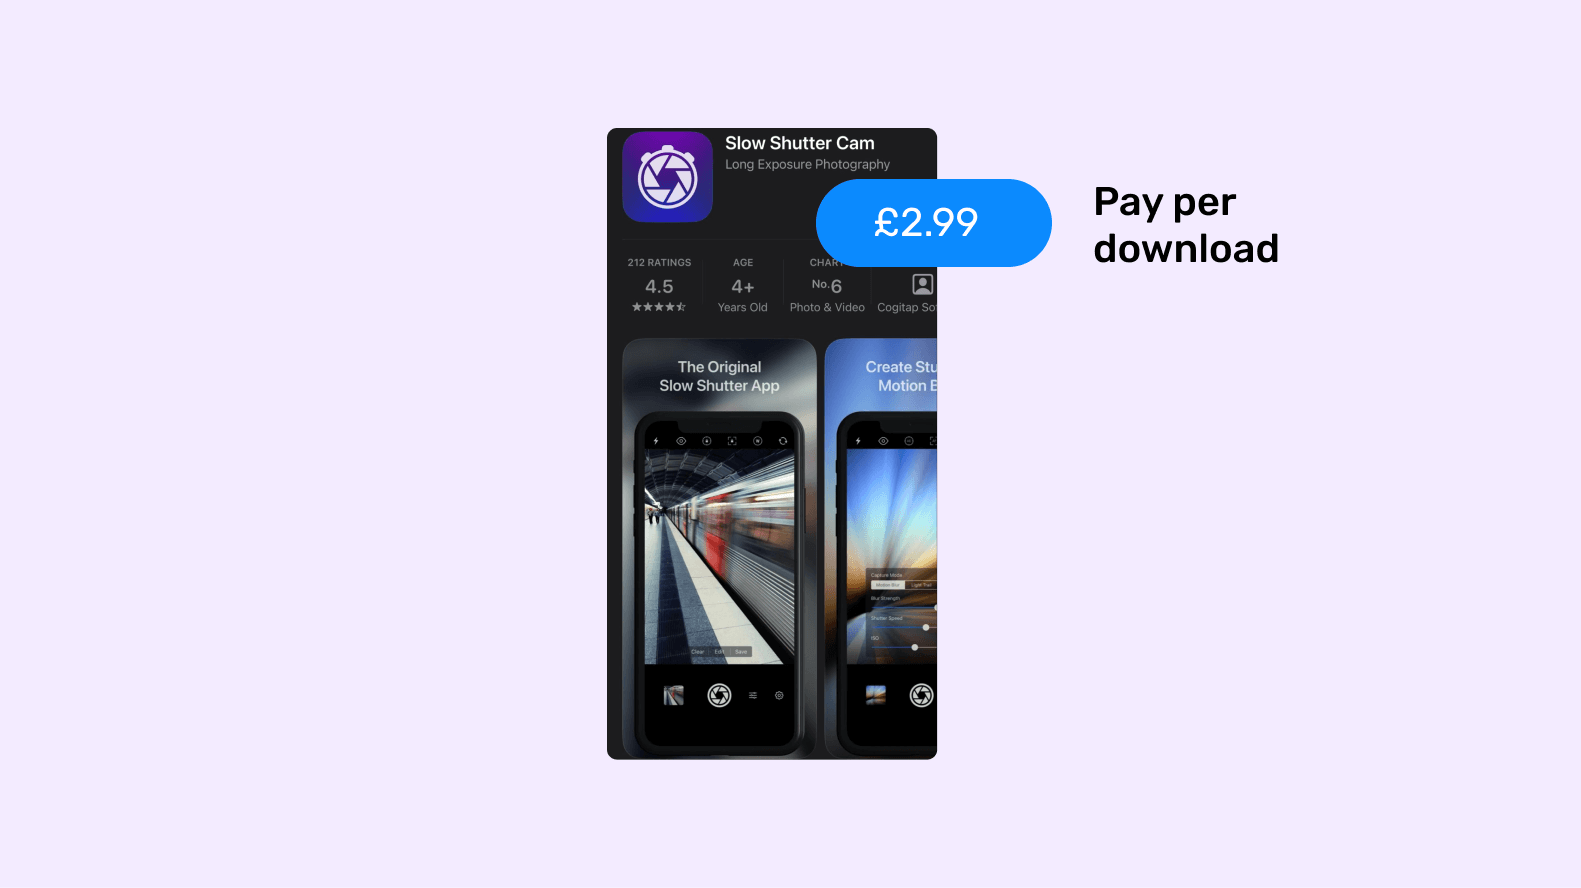 A concept of pay-per-download (PPD) app monetization model highlighting Slow Shutter Cam app listing